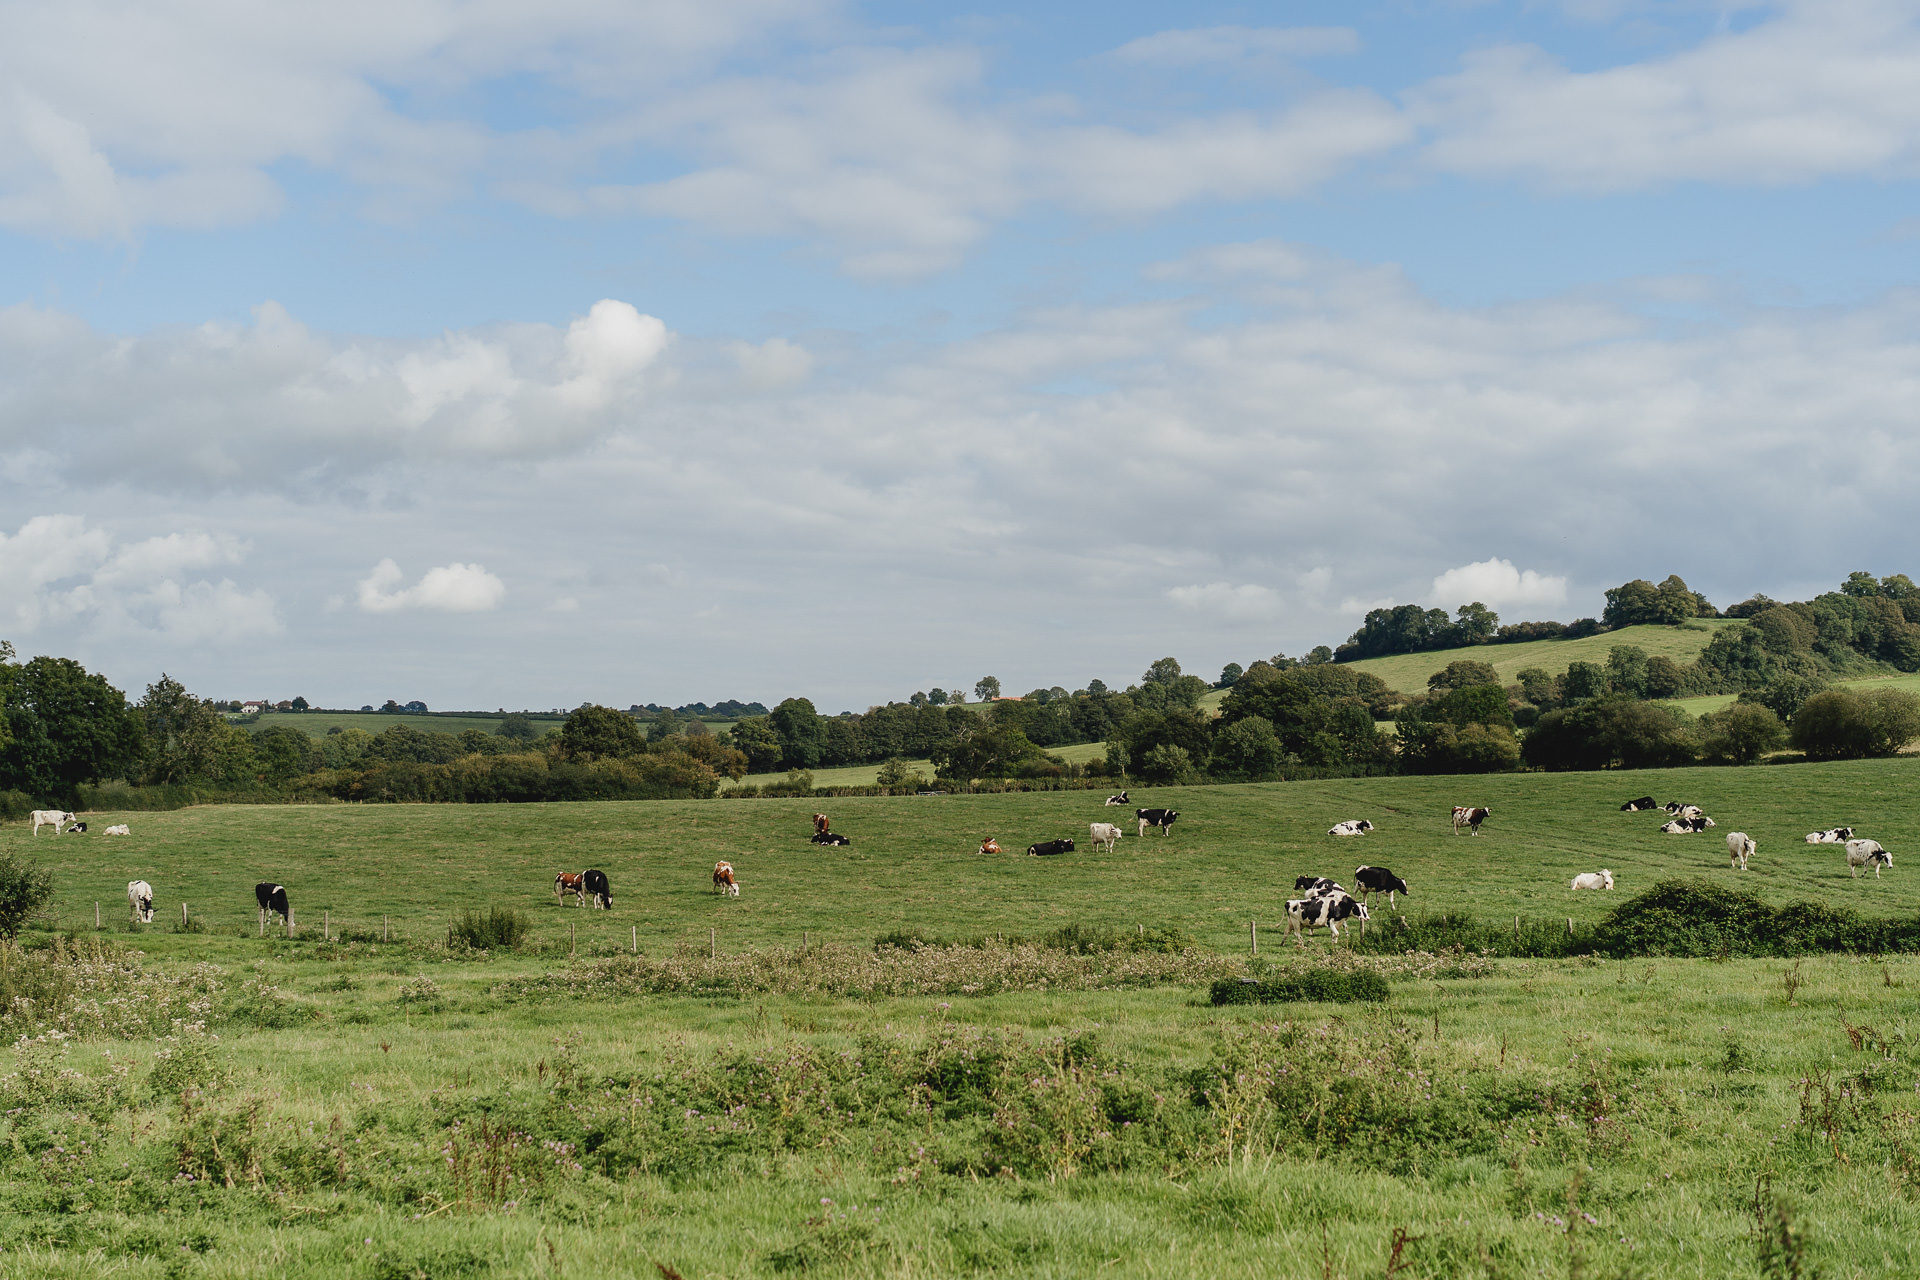 Cows in a field with blue skies above